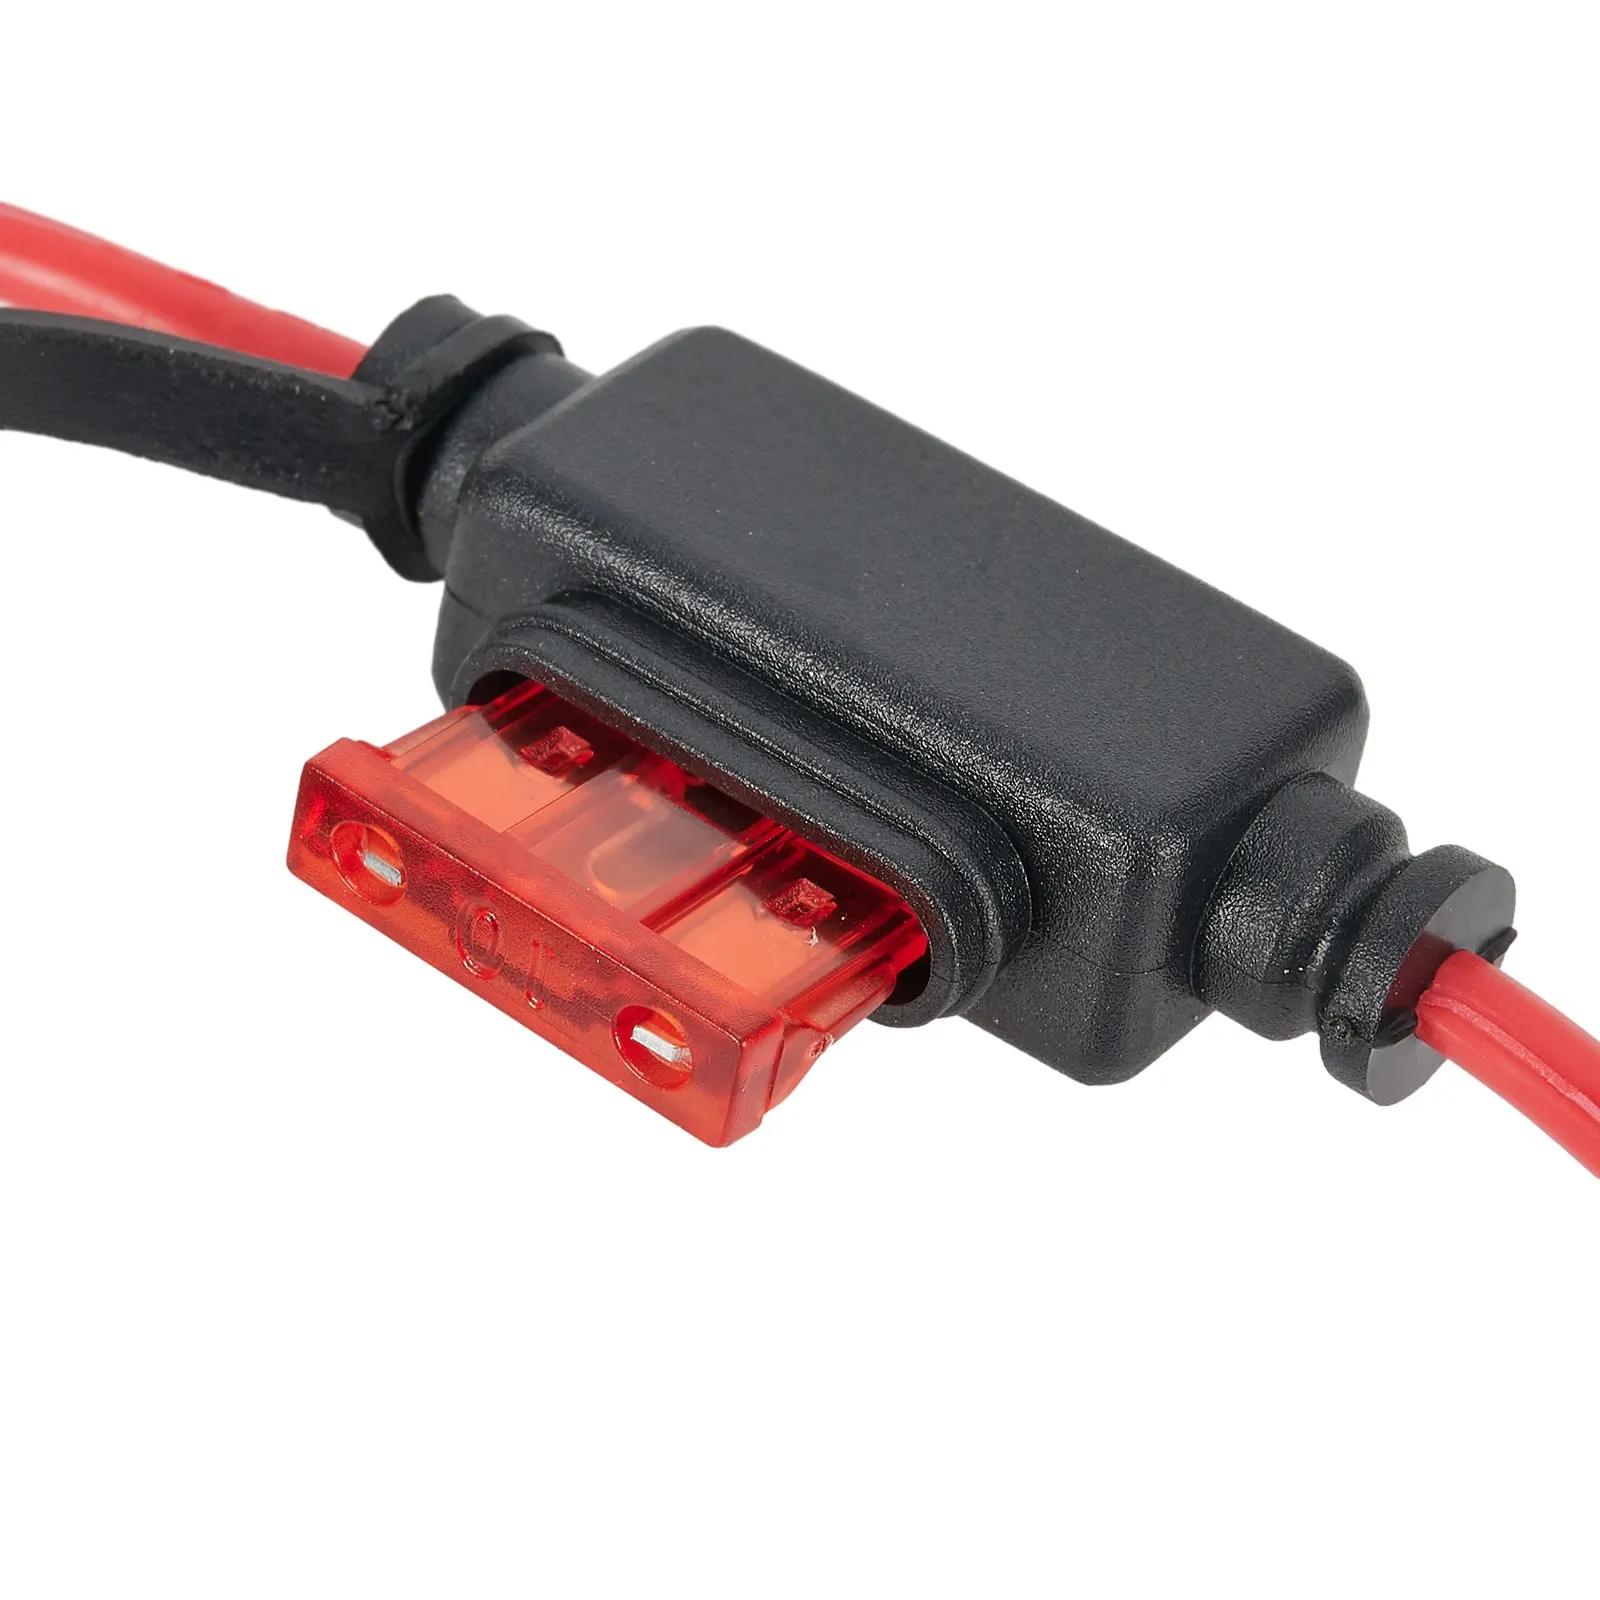 

SAE Terminal Battery Power Cable Motorcycle Outdoor Gear Essentials 10A Fuse 12V 18AWG 2 Feet Plastic Red/black